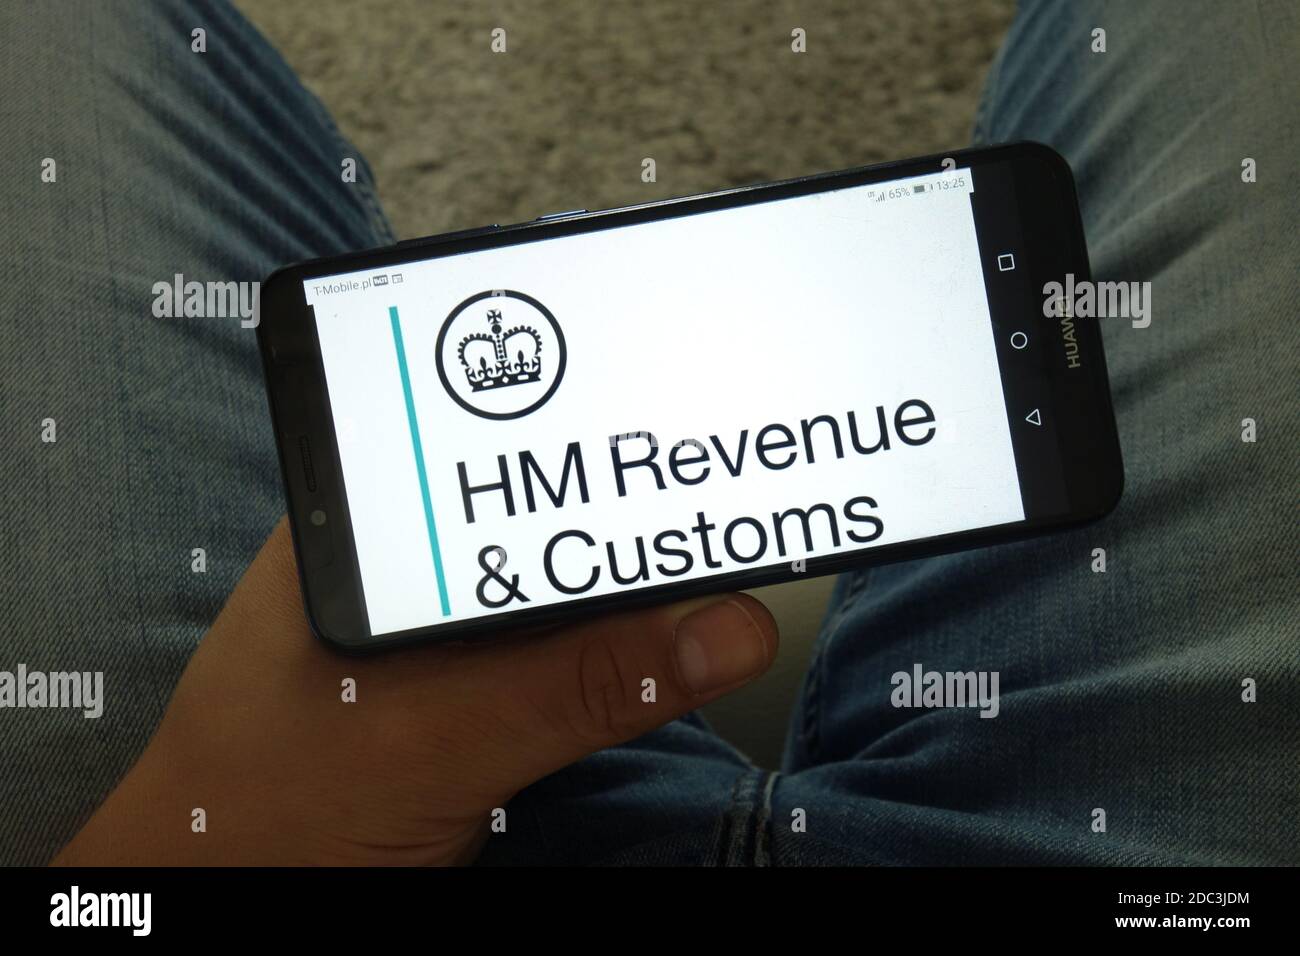 KONSKIE, POLAND - June 29, 2019: HM Revenue and Customs department logo displayed on mobile phone Stock Photo